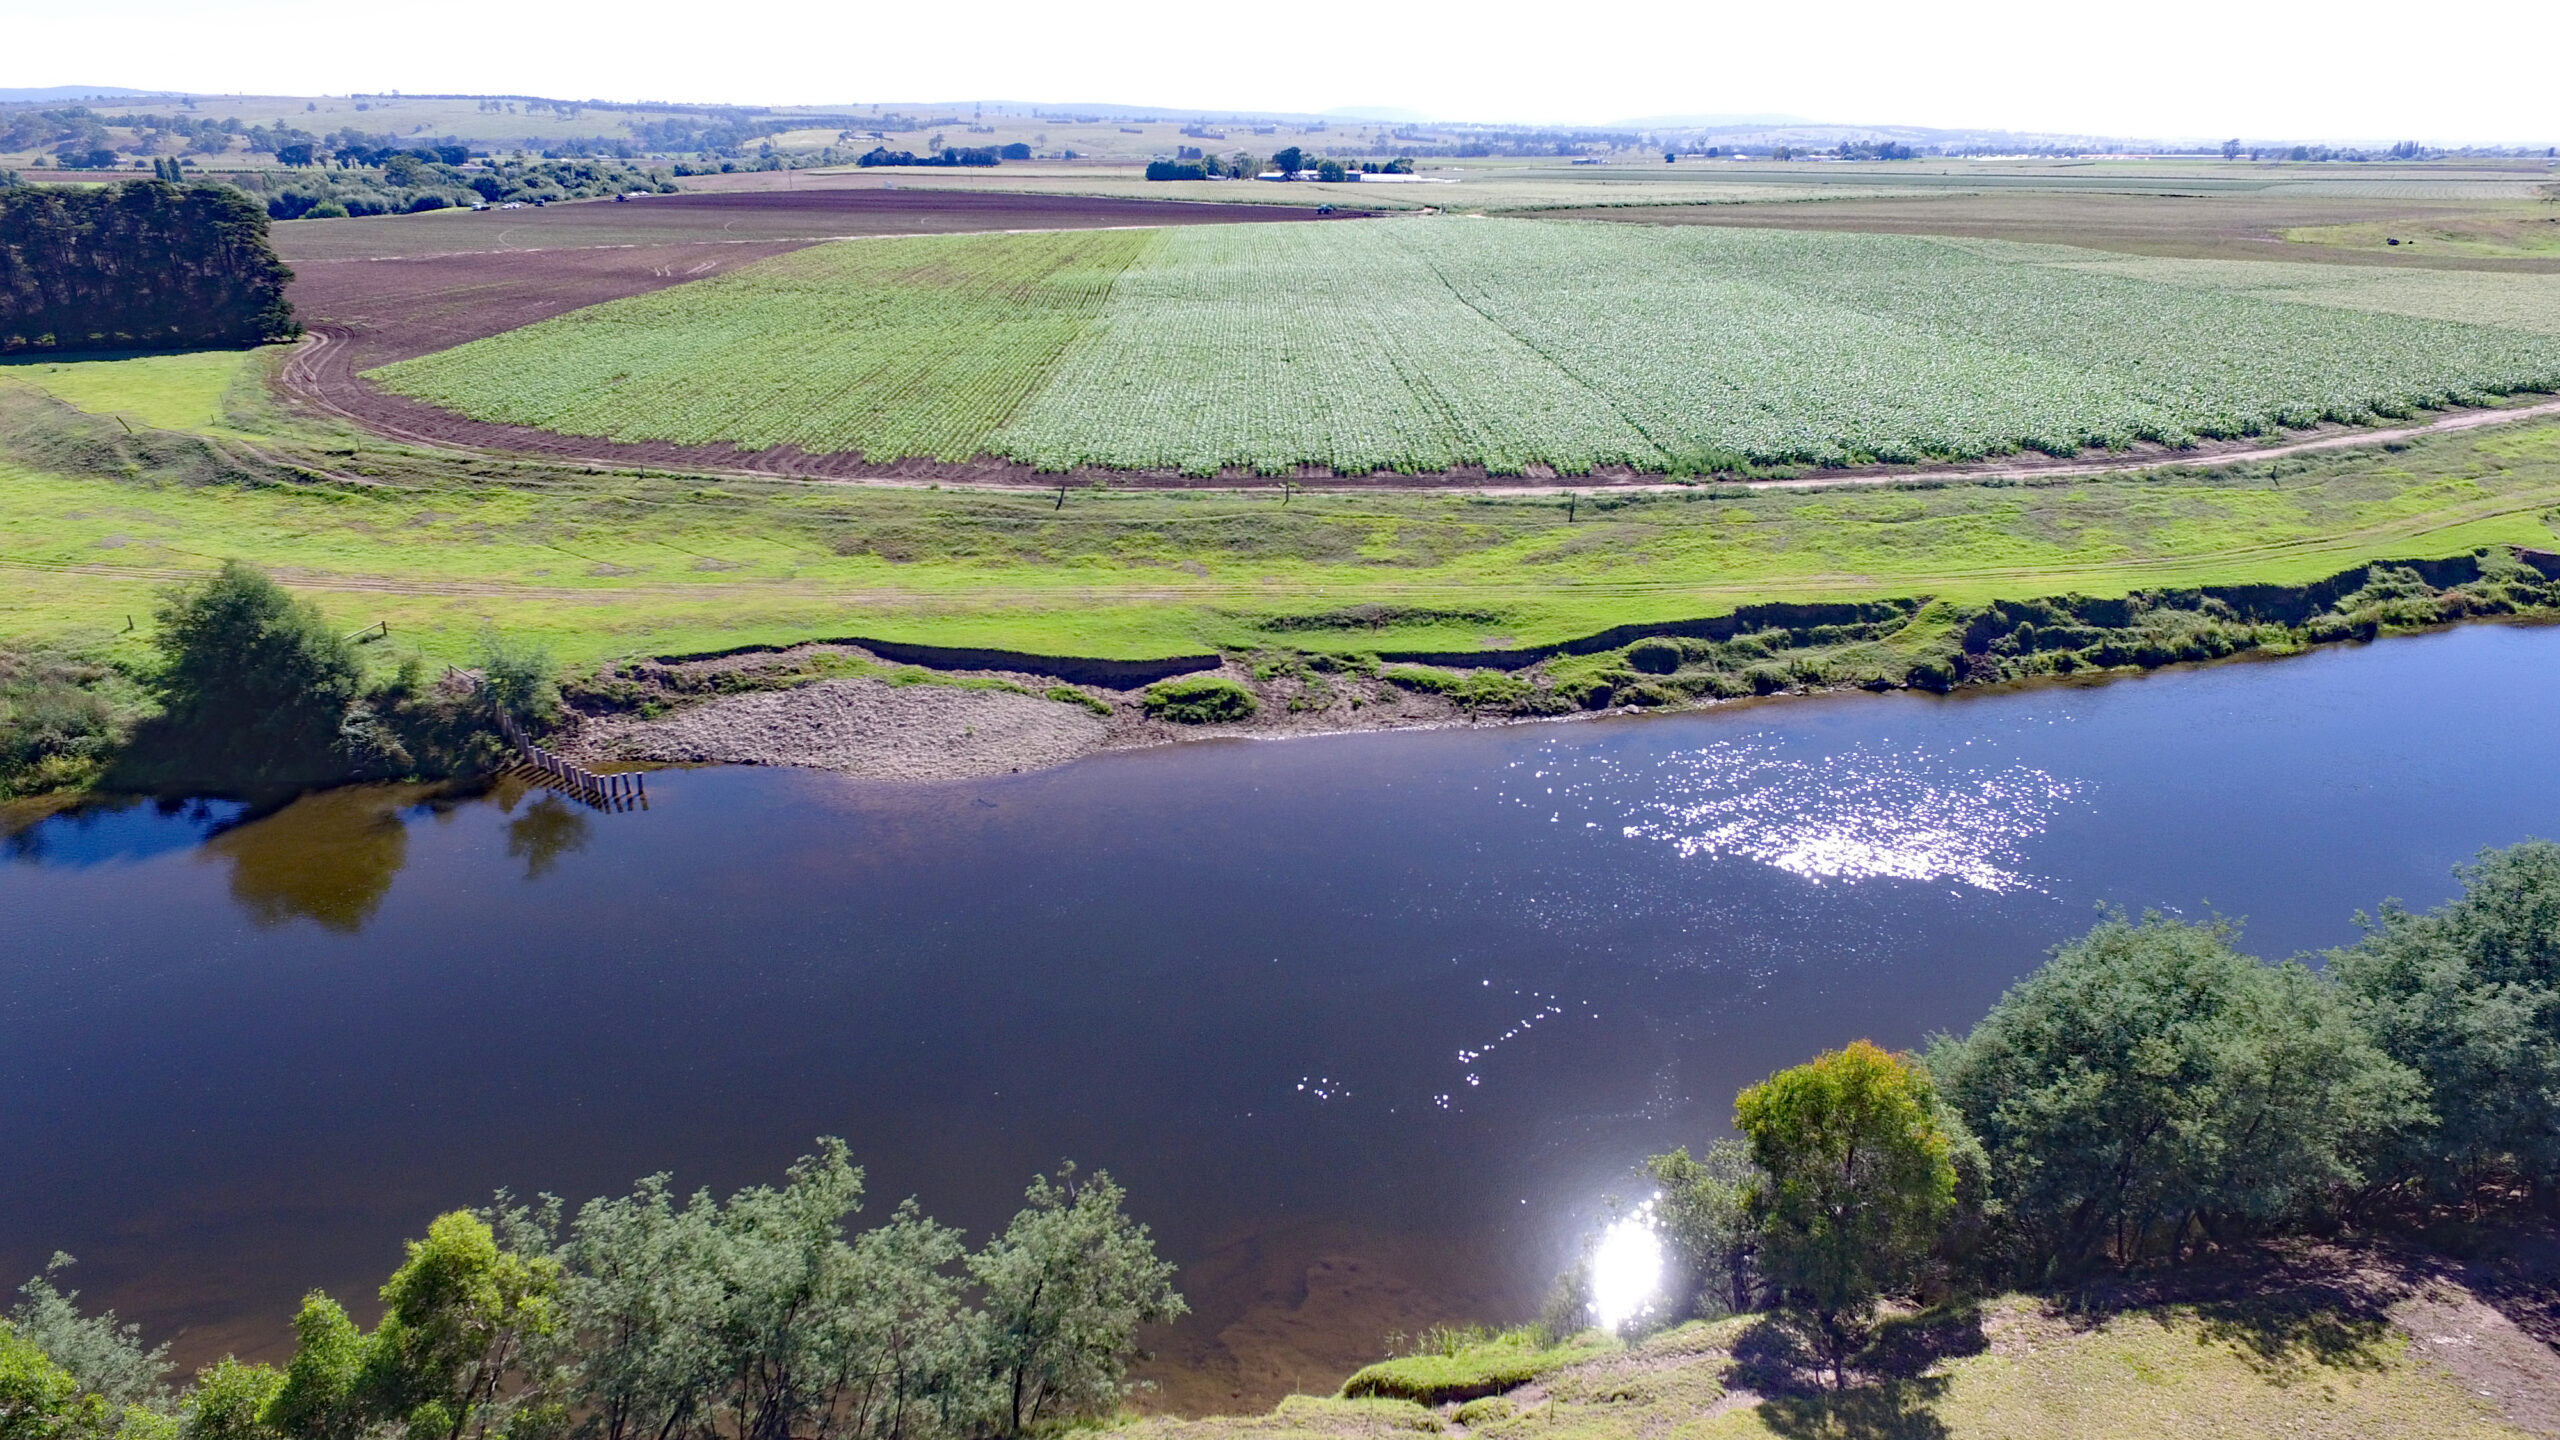 Lindenow Valley vegetable fields and Mitchell River